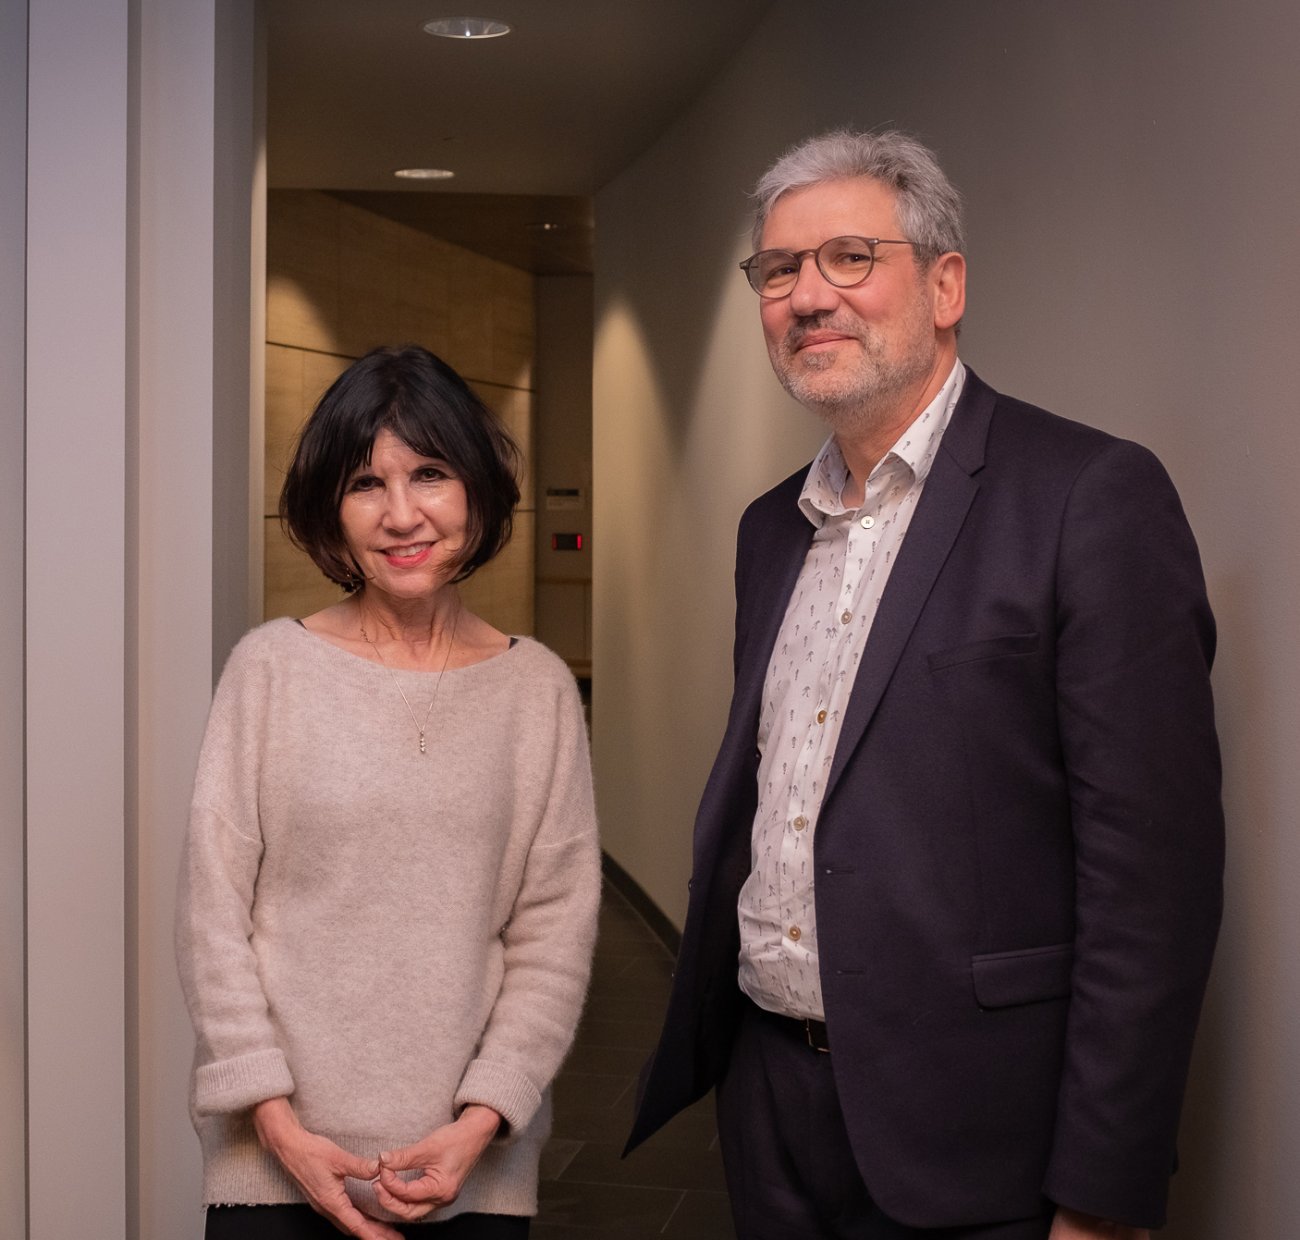 Christophe D'Enfert from Institut Pasteur with Katy Giacomini from UCSF